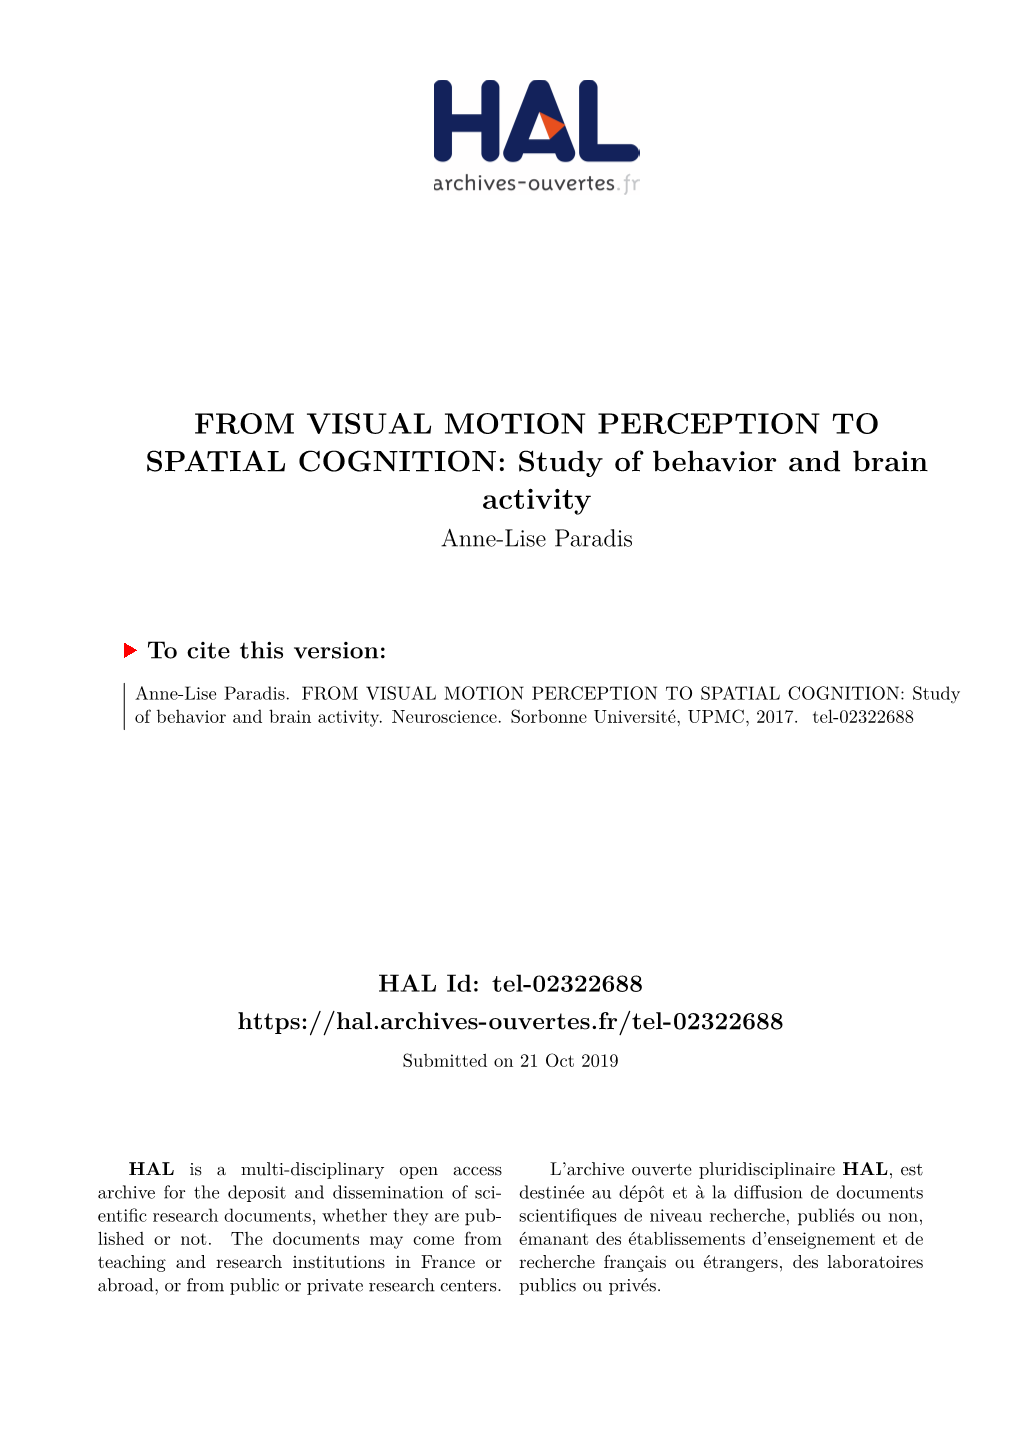 FROM VISUAL MOTION PERCEPTION to SPATIAL COGNITION: Study of Behavior and Brain Activity Anne-Lise Paradis